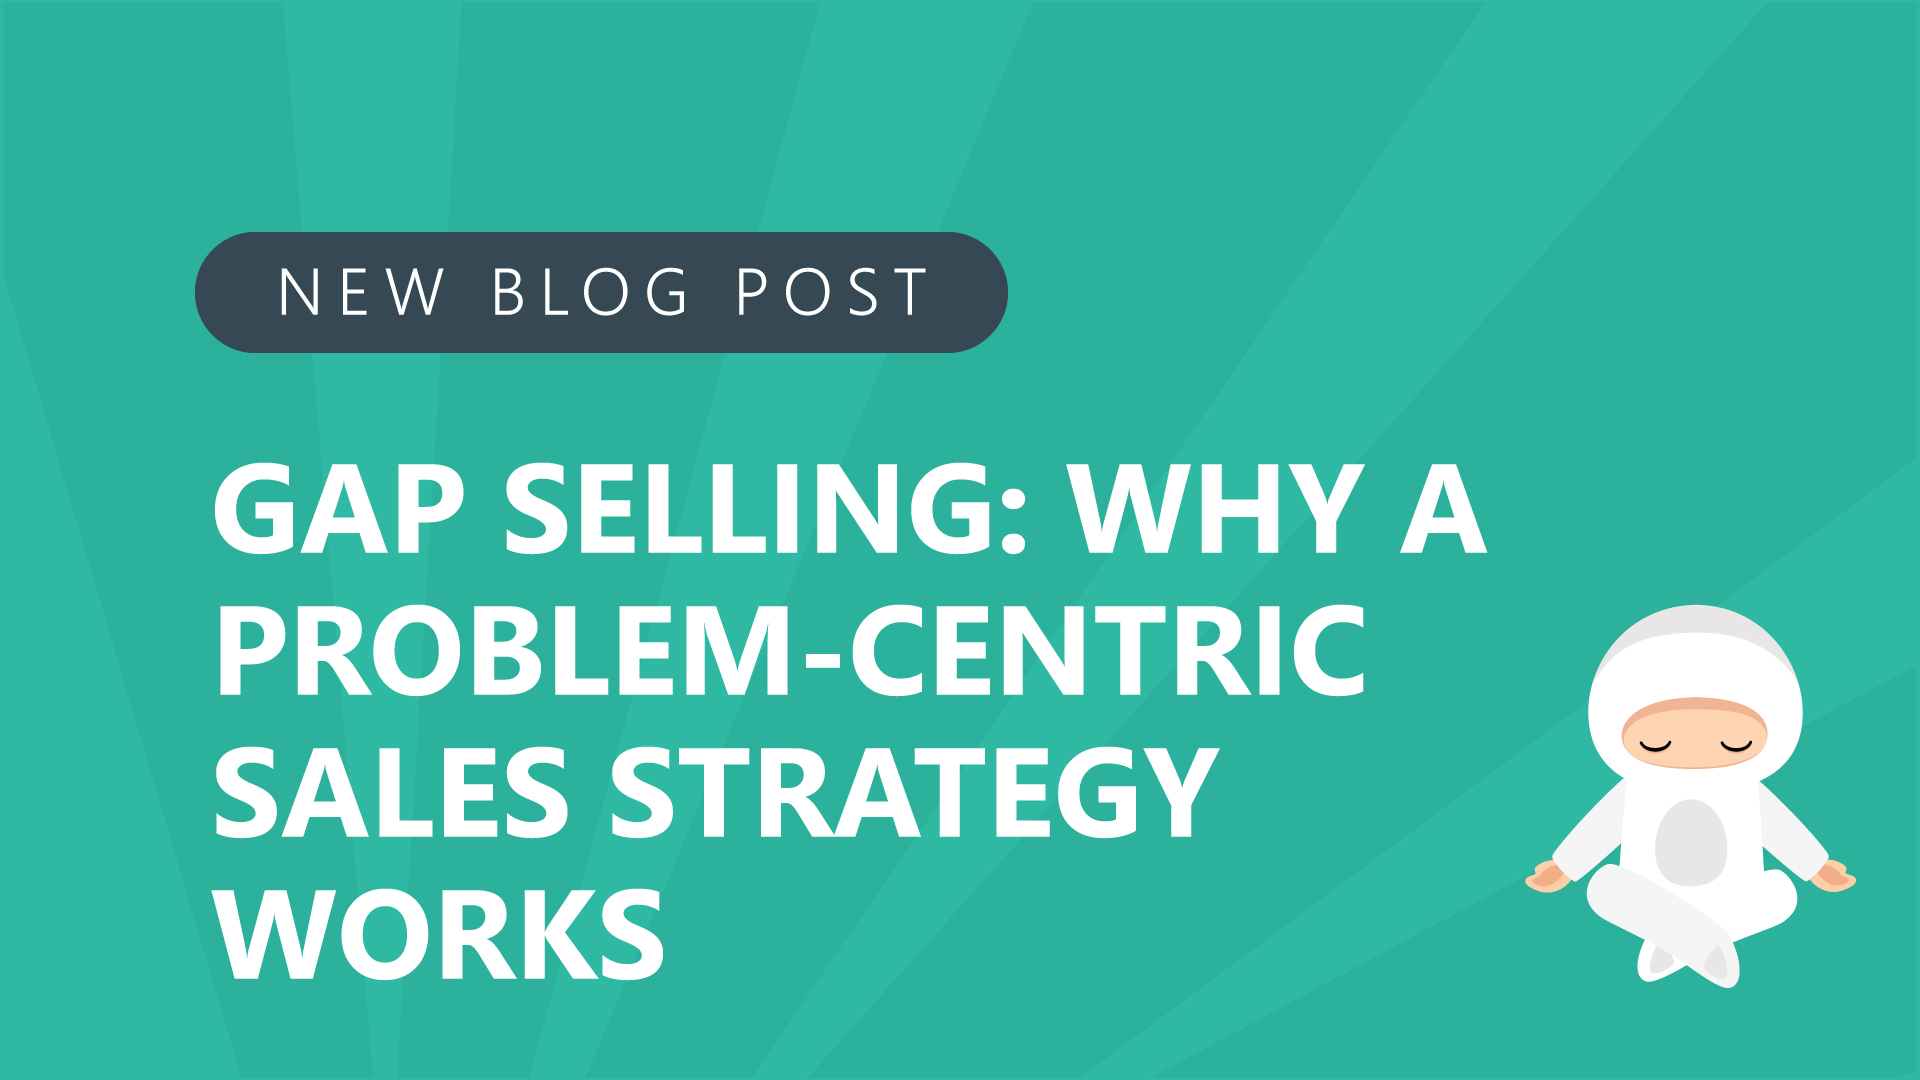 68-Gap-Selling-WHY-a-Problem-Centric-Sales-Strategy-Works.jpg